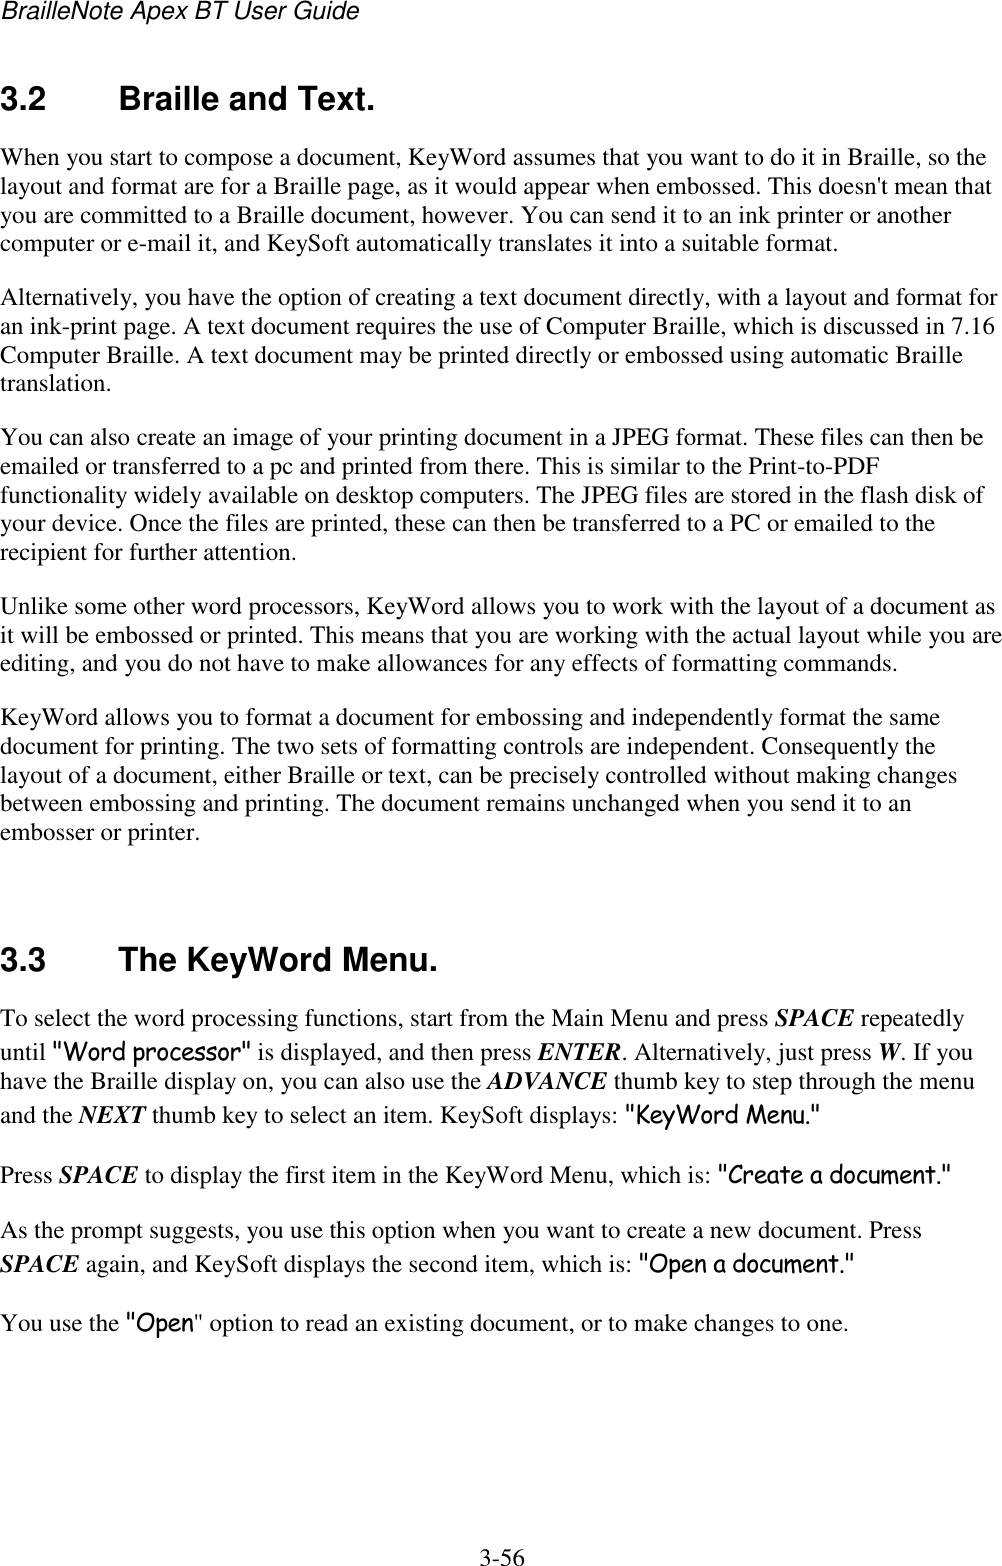 BrailleNote Apex BT User Guide   3-56   3.2  Braille and Text. When you start to compose a document, KeyWord assumes that you want to do it in Braille, so the layout and format are for a Braille page, as it would appear when embossed. This doesn&apos;t mean that you are committed to a Braille document, however. You can send it to an ink printer or another computer or e-mail it, and KeySoft automatically translates it into a suitable format. Alternatively, you have the option of creating a text document directly, with a layout and format for an ink-print page. A text document requires the use of Computer Braille, which is discussed in 7.16 Computer Braille. A text document may be printed directly or embossed using automatic Braille translation. You can also create an image of your printing document in a JPEG format. These files can then be emailed or transferred to a pc and printed from there. This is similar to the Print-to-PDF functionality widely available on desktop computers. The JPEG files are stored in the flash disk of your device. Once the files are printed, these can then be transferred to a PC or emailed to the recipient for further attention. Unlike some other word processors, KeyWord allows you to work with the layout of a document as it will be embossed or printed. This means that you are working with the actual layout while you are editing, and you do not have to make allowances for any effects of formatting commands. KeyWord allows you to format a document for embossing and independently format the same document for printing. The two sets of formatting controls are independent. Consequently the layout of a document, either Braille or text, can be precisely controlled without making changes between embossing and printing. The document remains unchanged when you send it to an embosser or printer.   3.3  The KeyWord Menu. To select the word processing functions, start from the Main Menu and press SPACE repeatedly until &quot;Word processor&quot; is displayed, and then press ENTER. Alternatively, just press W. If you have the Braille display on, you can also use the ADVANCE thumb key to step through the menu and the NEXT thumb key to select an item. KeySoft displays: &quot;KeyWord Menu.&quot; Press SPACE to display the first item in the KeyWord Menu, which is: &quot;Create a document.&quot; As the prompt suggests, you use this option when you want to create a new document. Press SPACE again, and KeySoft displays the second item, which is: &quot;Open a document.&quot; You use the &quot;Open&quot; option to read an existing document, or to make changes to one.   